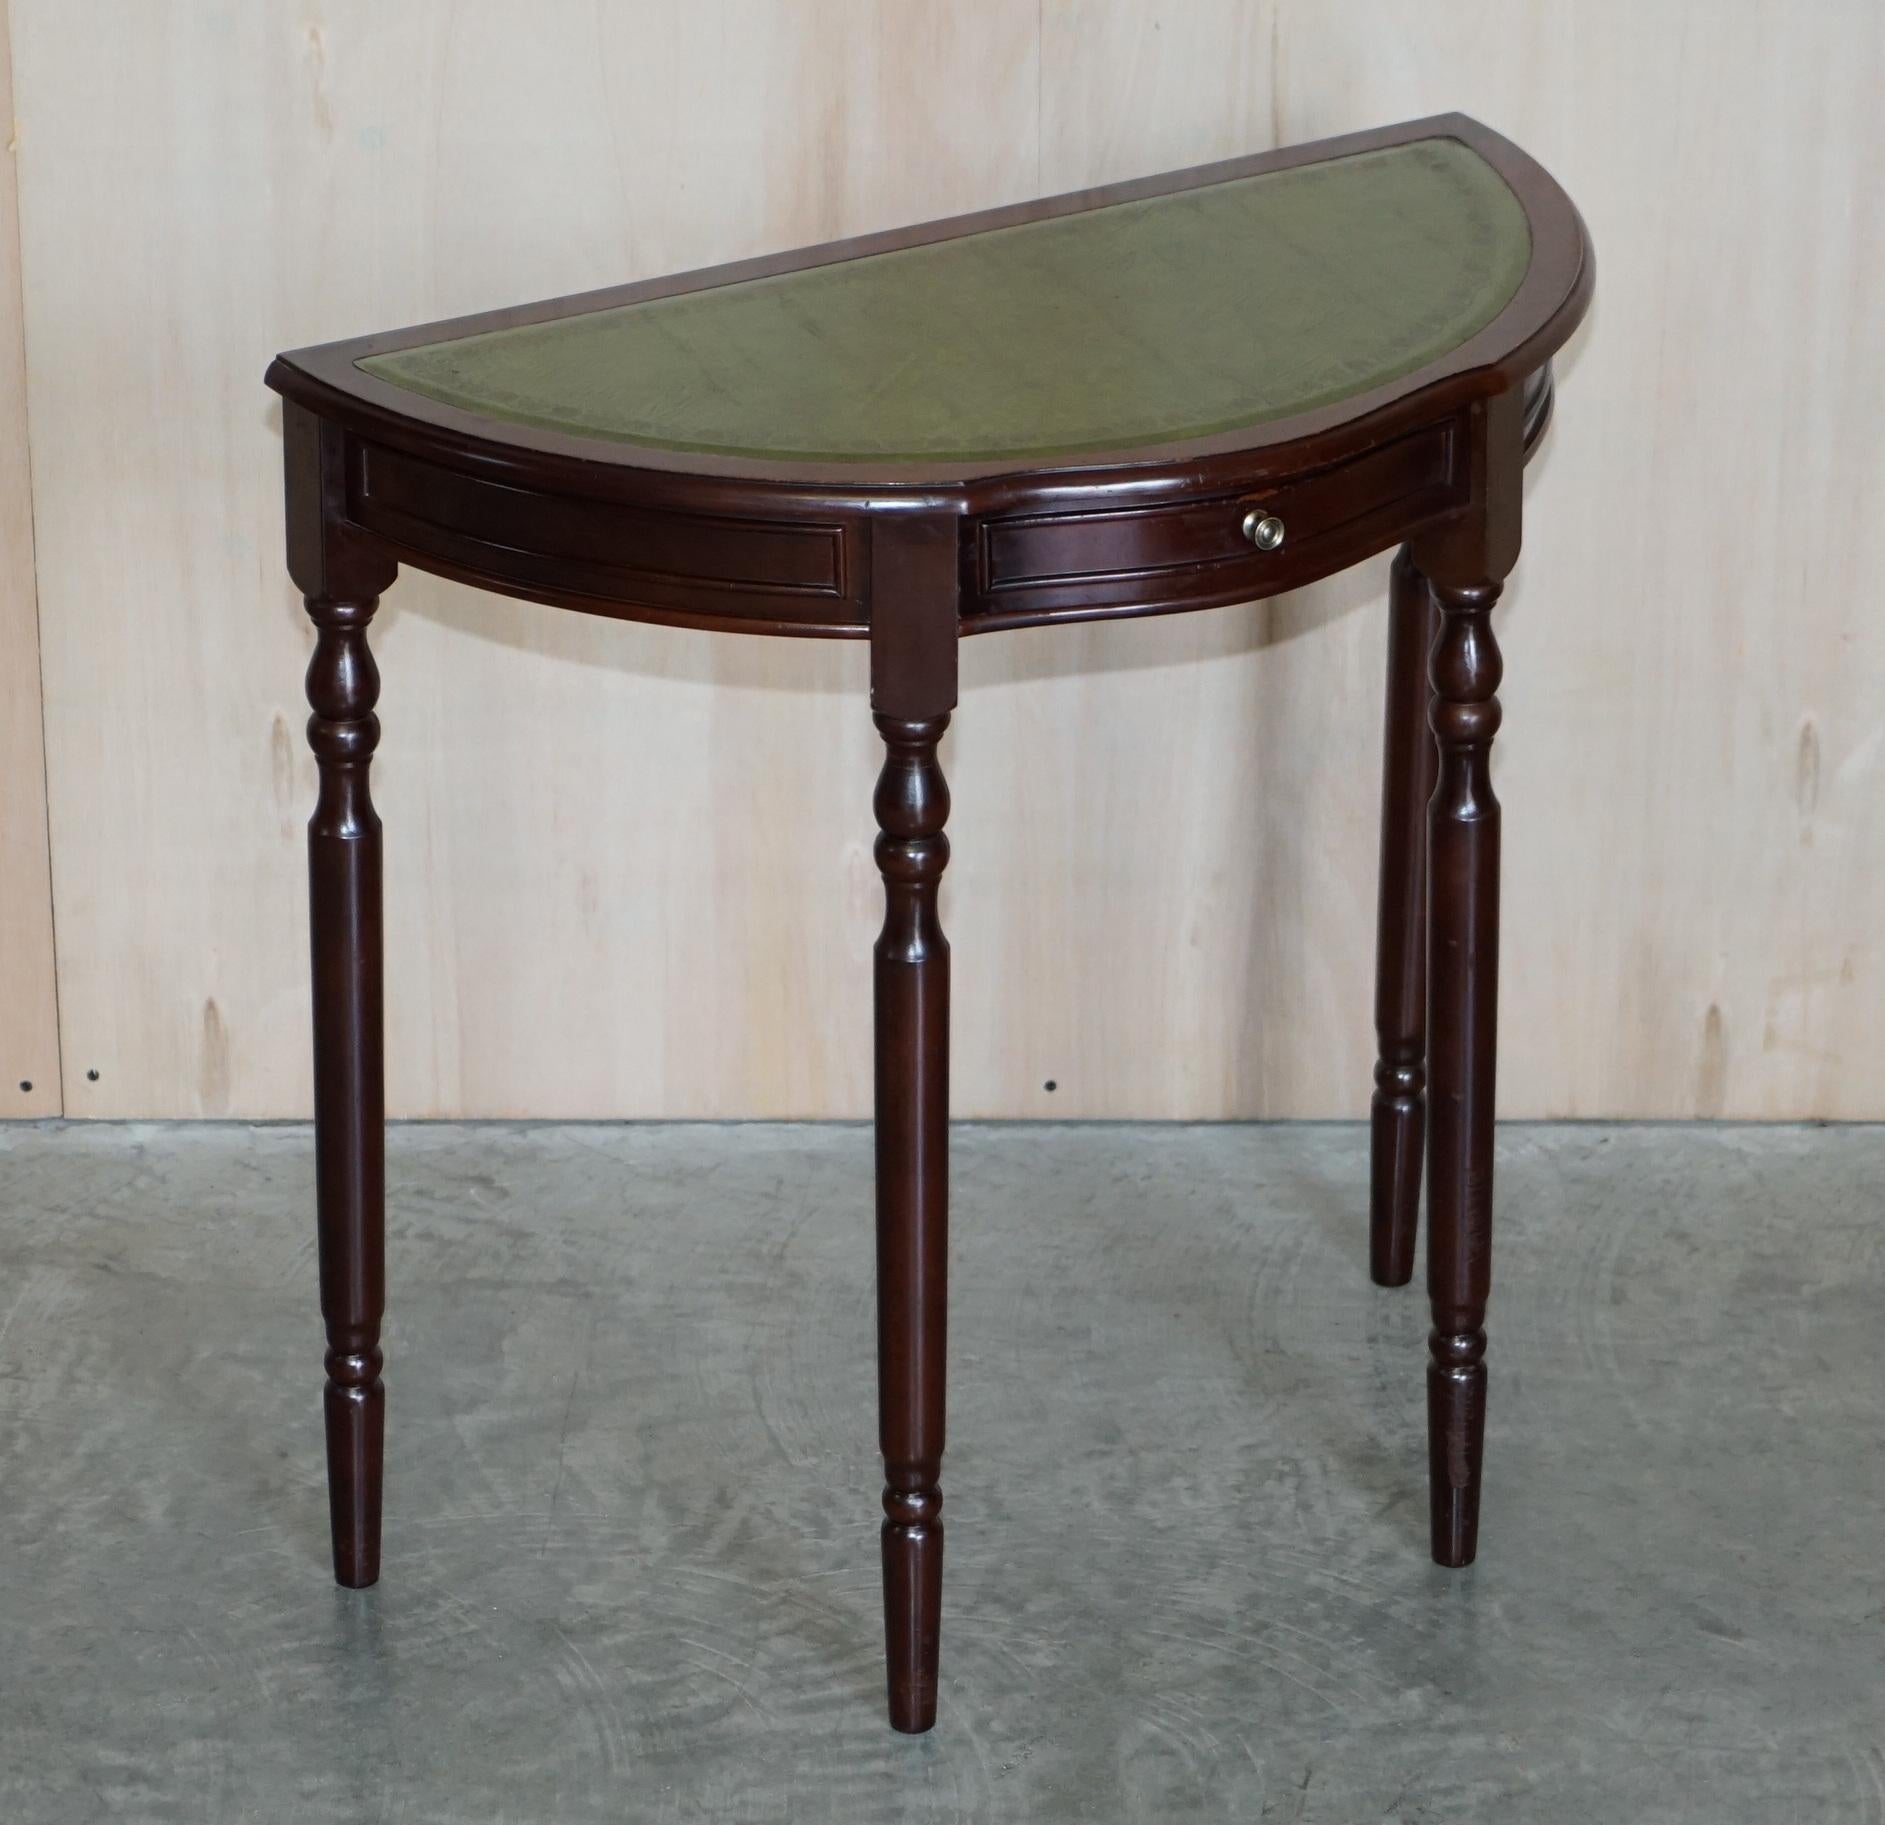 We are delighted to offer for sale this lovely vintage half moon mahogany with green leather top demi lune single drawer console table.

A good looking well made and decorative table, it has a nice vintage patina to it and works well in any